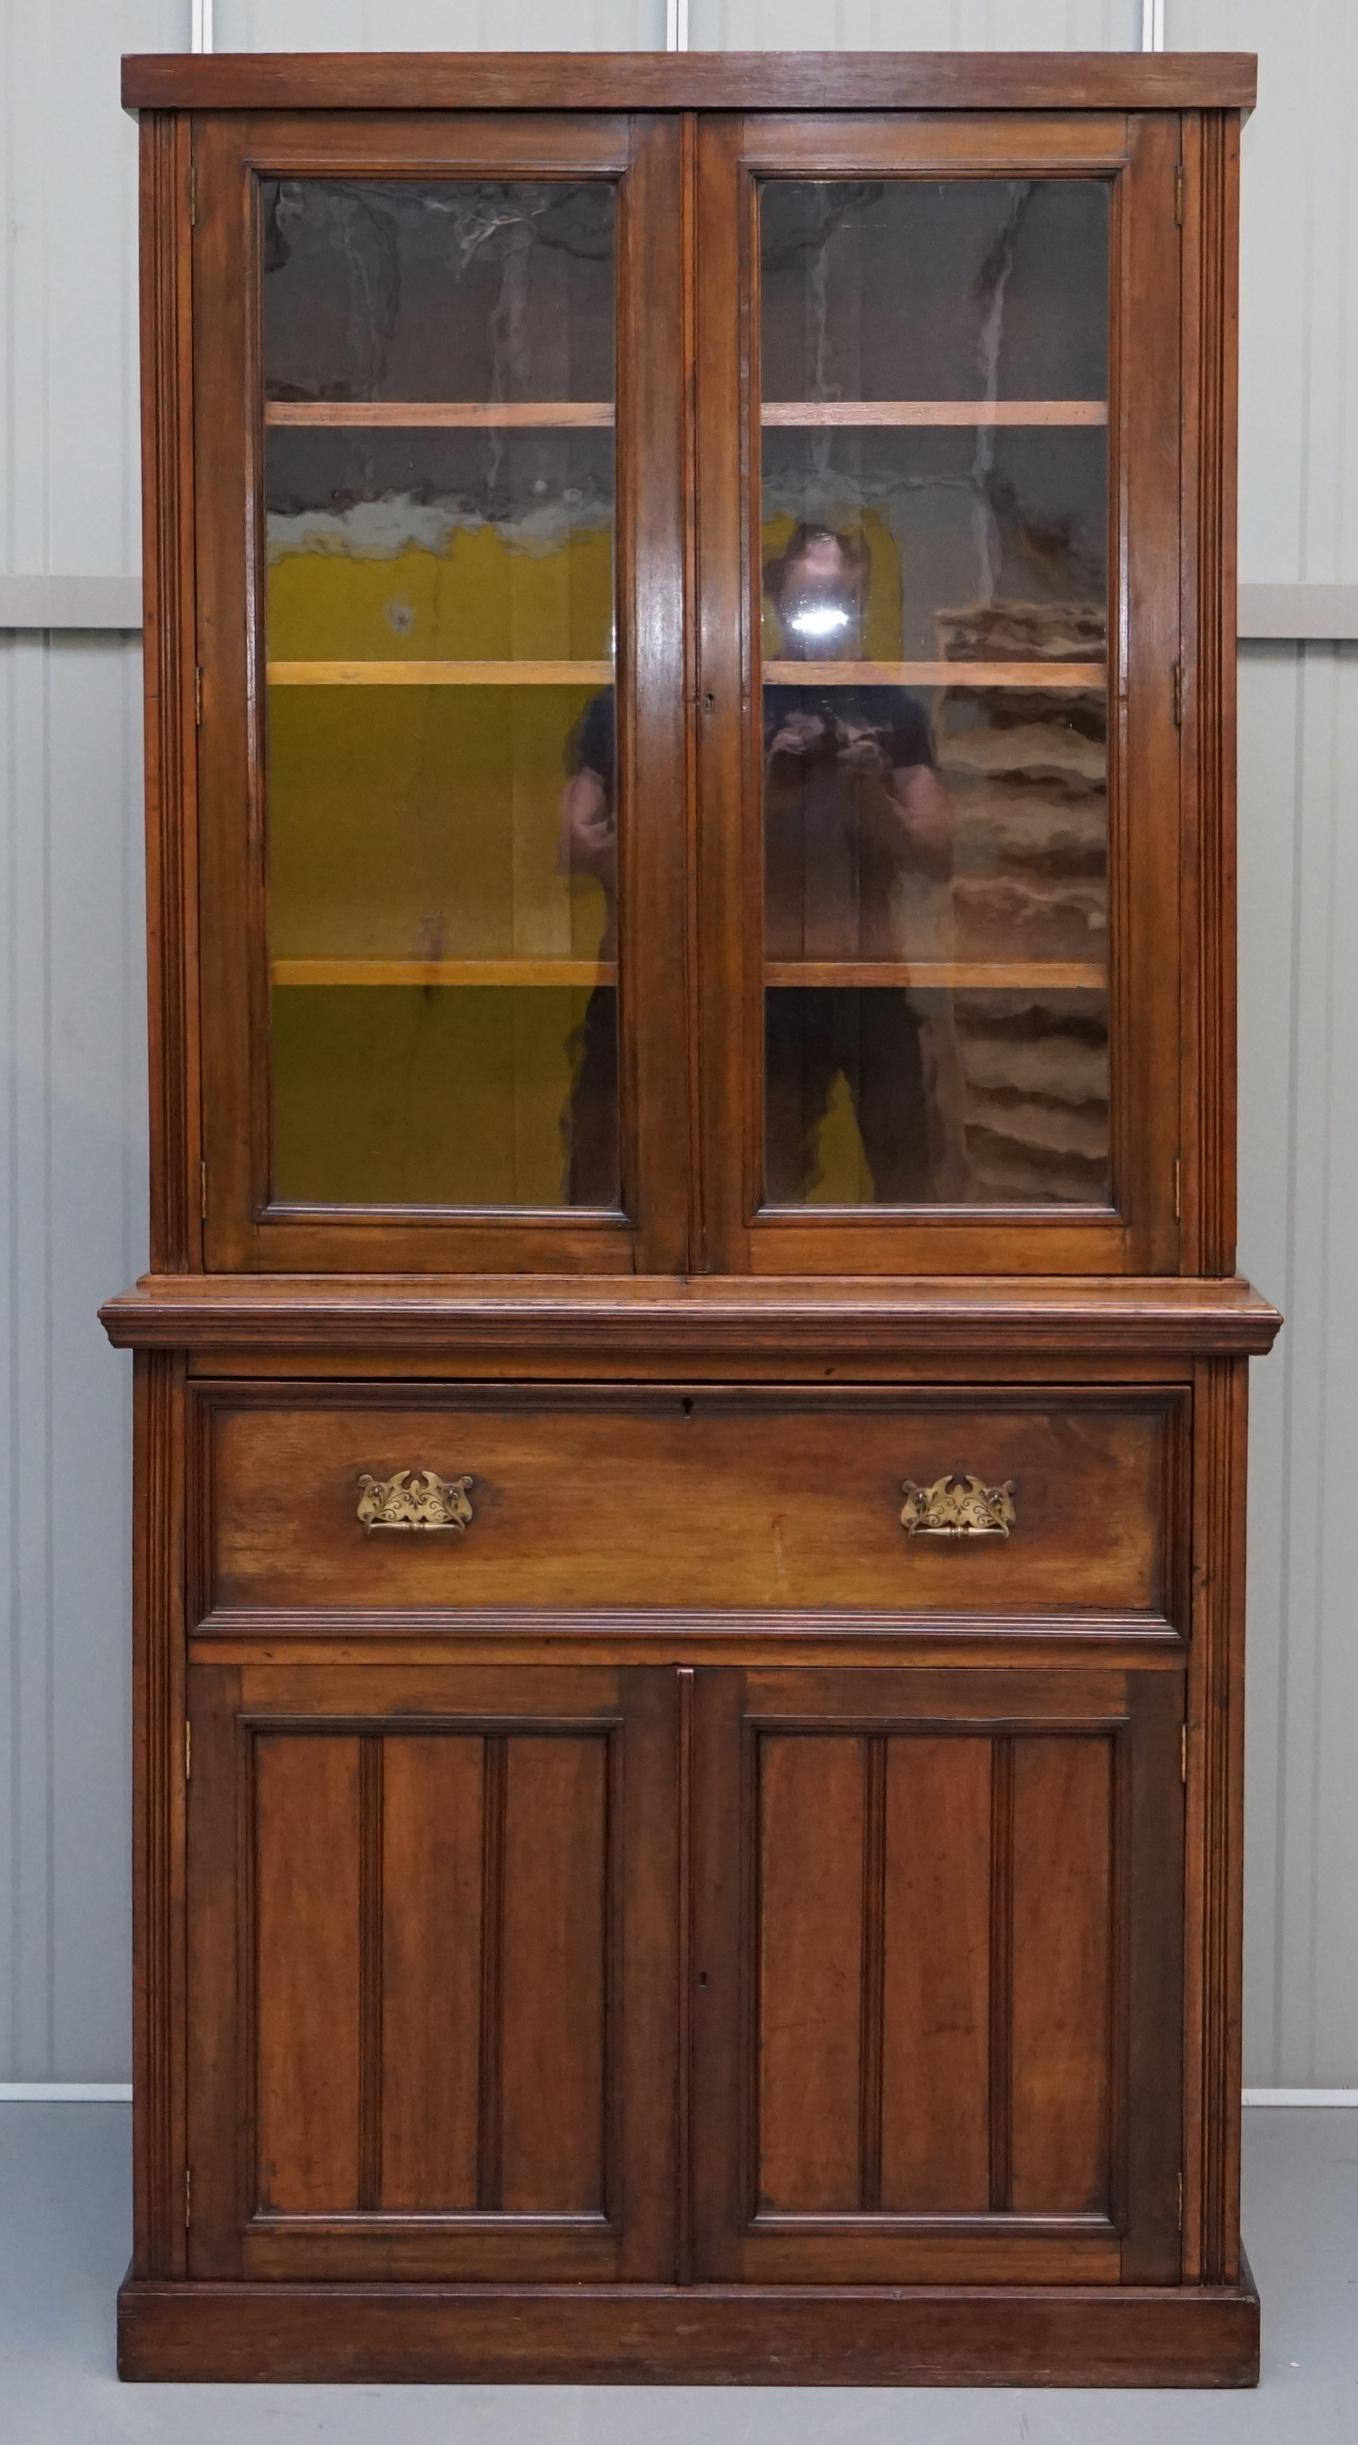 We are delighted to this stunning circa 1880 light mahogany library bookcase with secrétaire desk

A well made and collectable library bookcase. The top section has three height adjustable shelves so four sections in total for your private